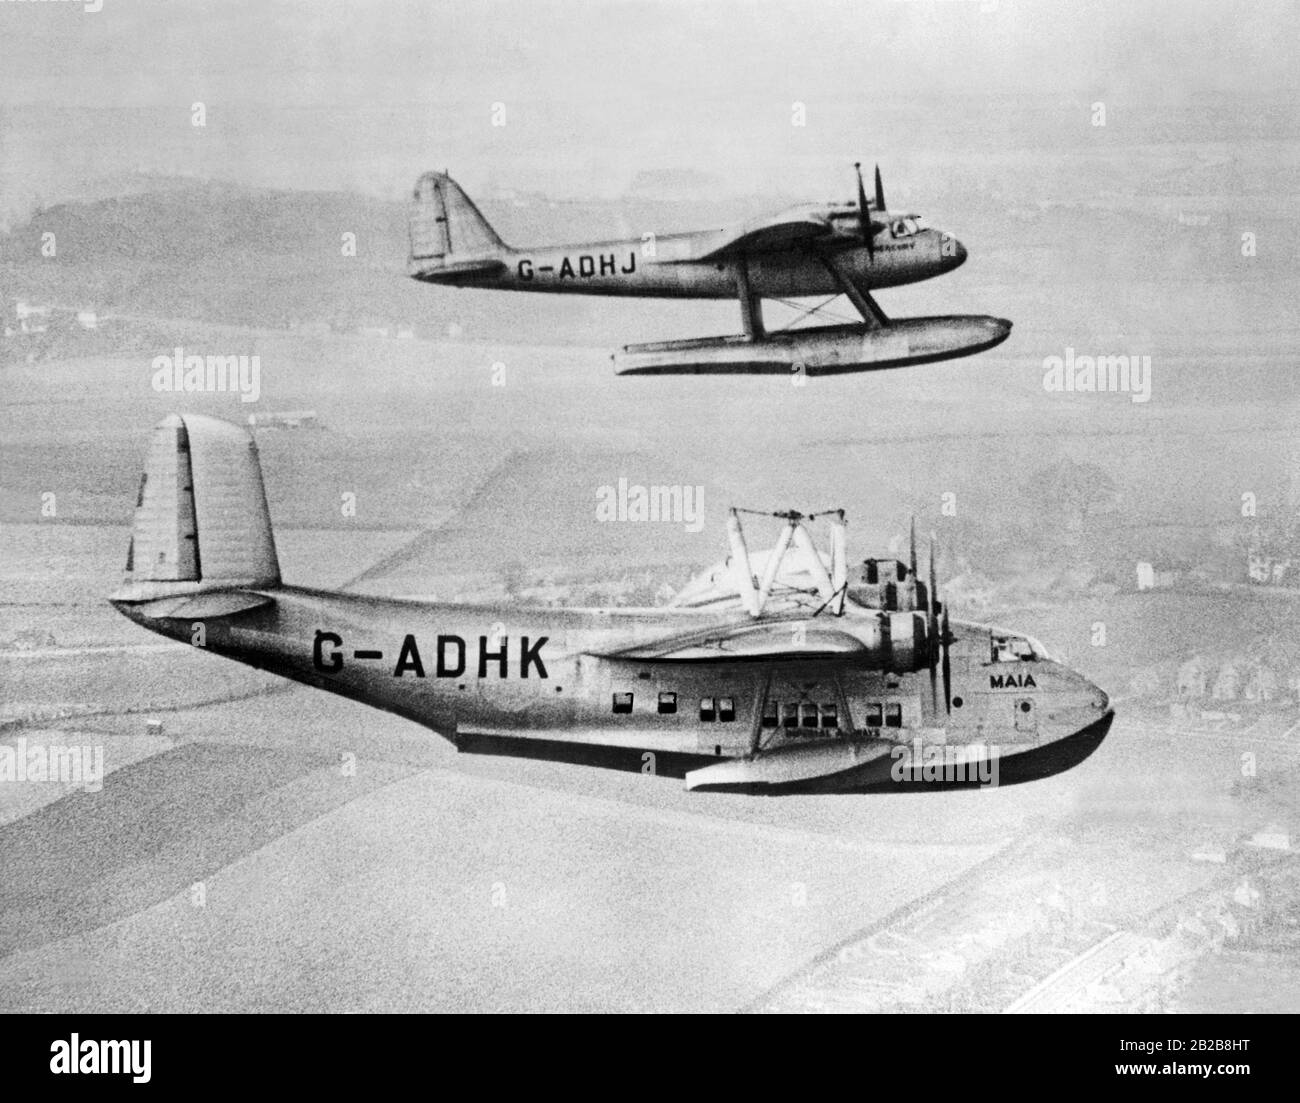 The Short Mayo Composite aircraft consists of a Short Empire flying boat (G-ADHK 'Maia') which carries a smaller Short Mercury seaplane (G-ADHJ). The 'Mercury' was carried by the 'Maia' up to cruising altitude, then the planes parted company and the 'Maia' returned to the airport of departure. Thus the 'Mercury' could cover longer distances. Stock Photo